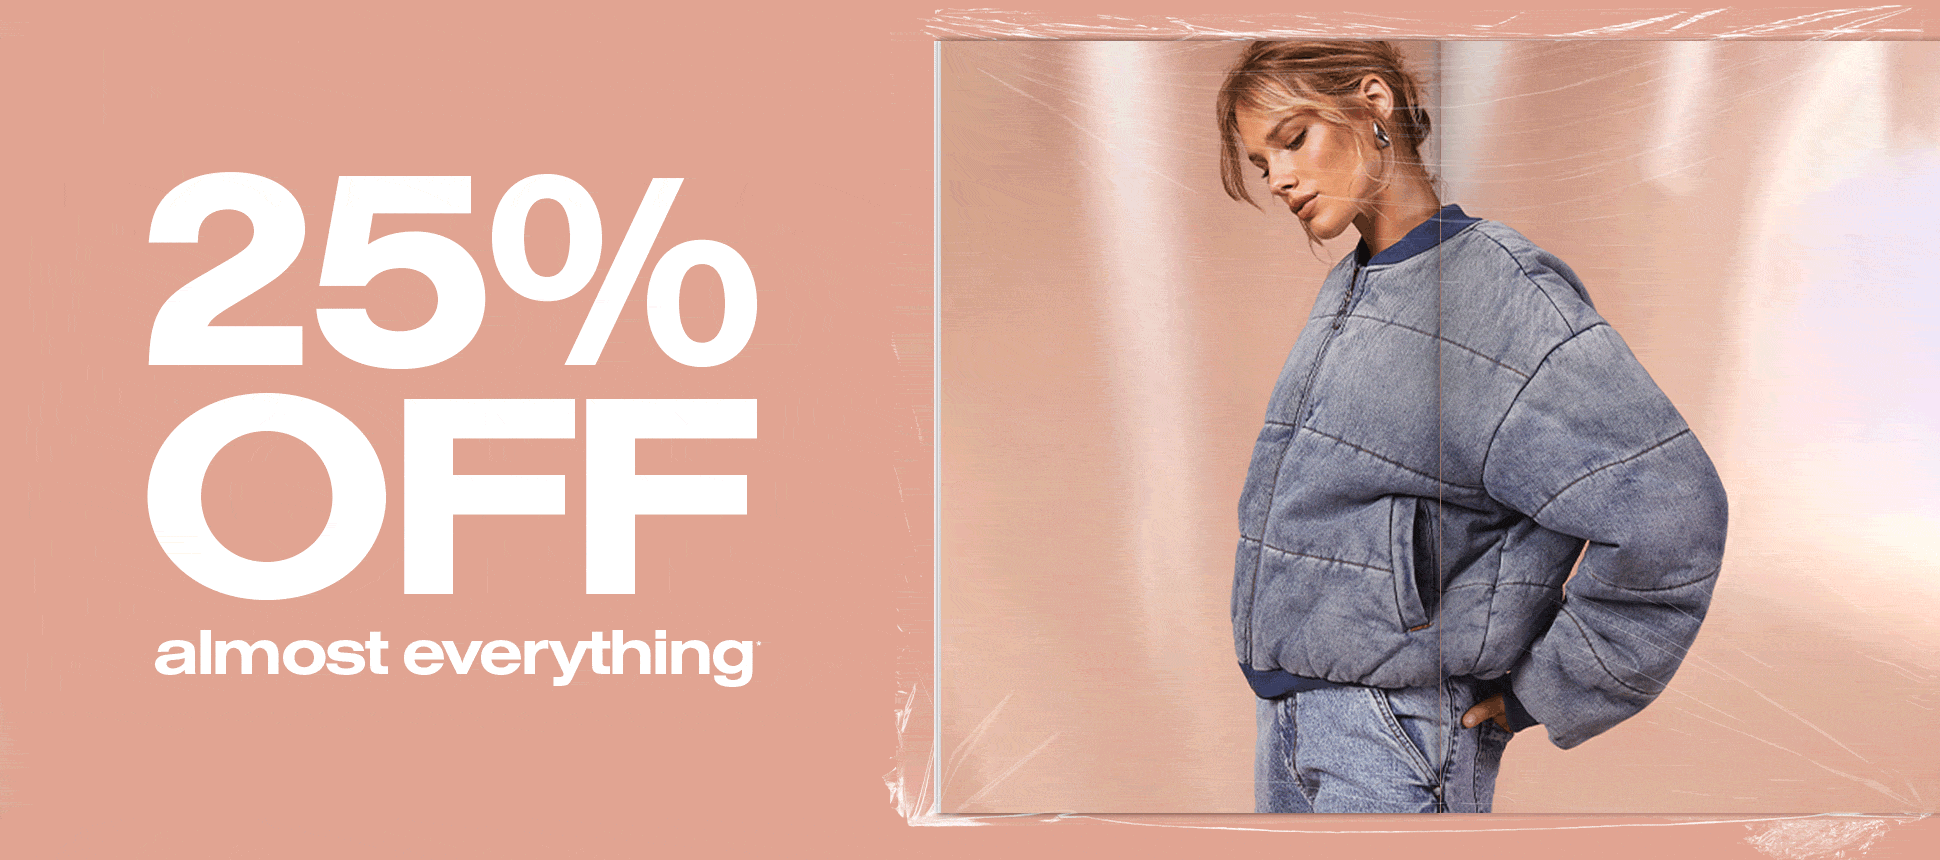 25% Off Almost Everything!